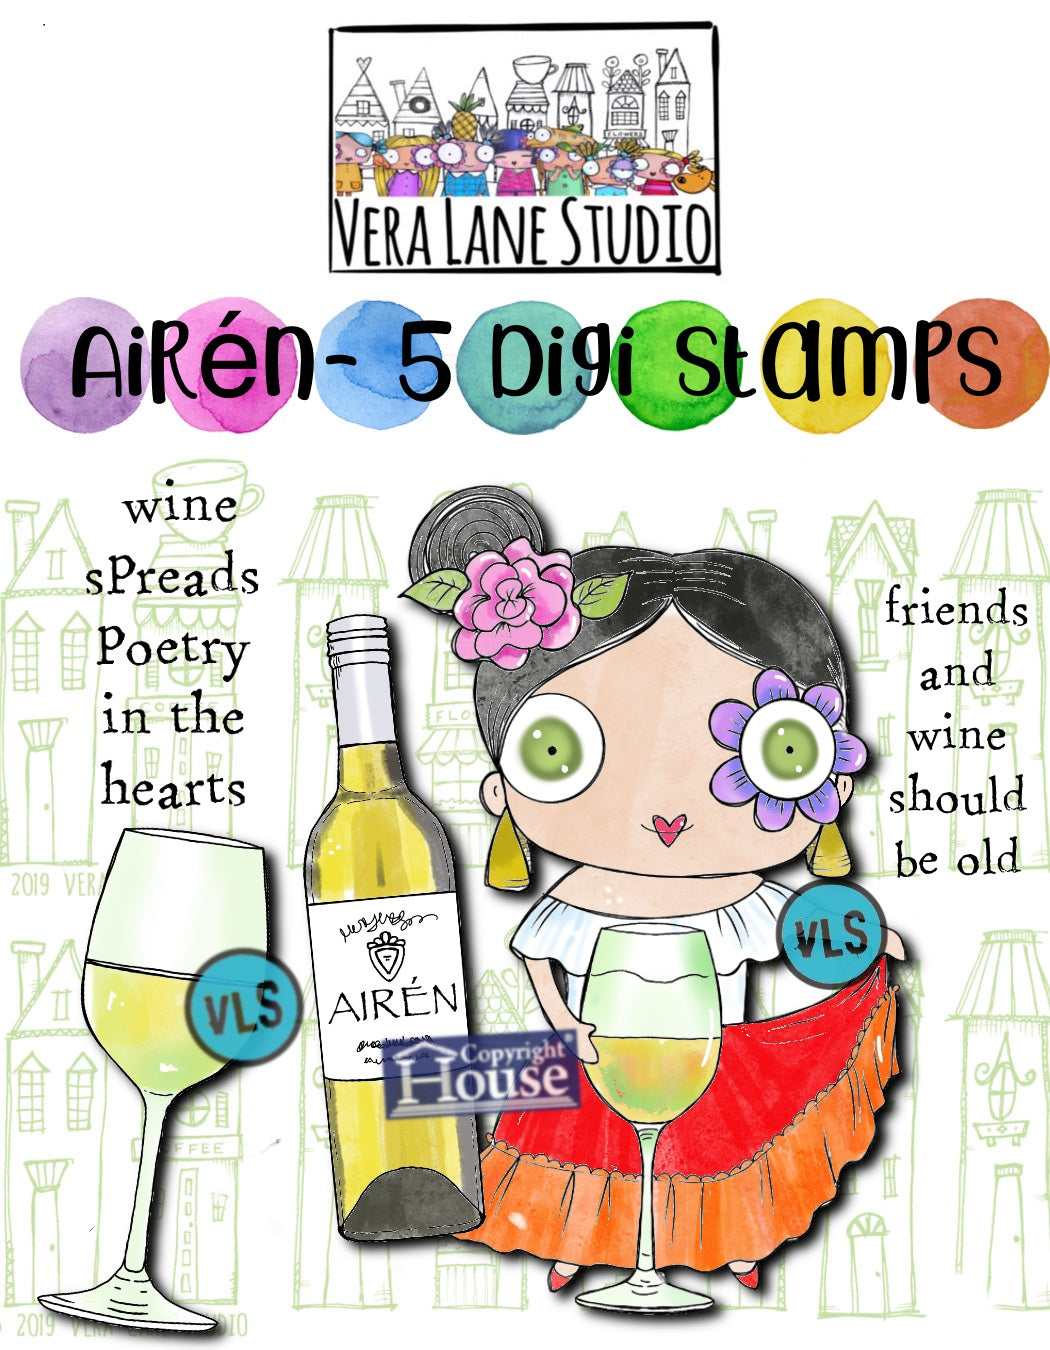 Airén - 5 digi stamp set in jpg and png files